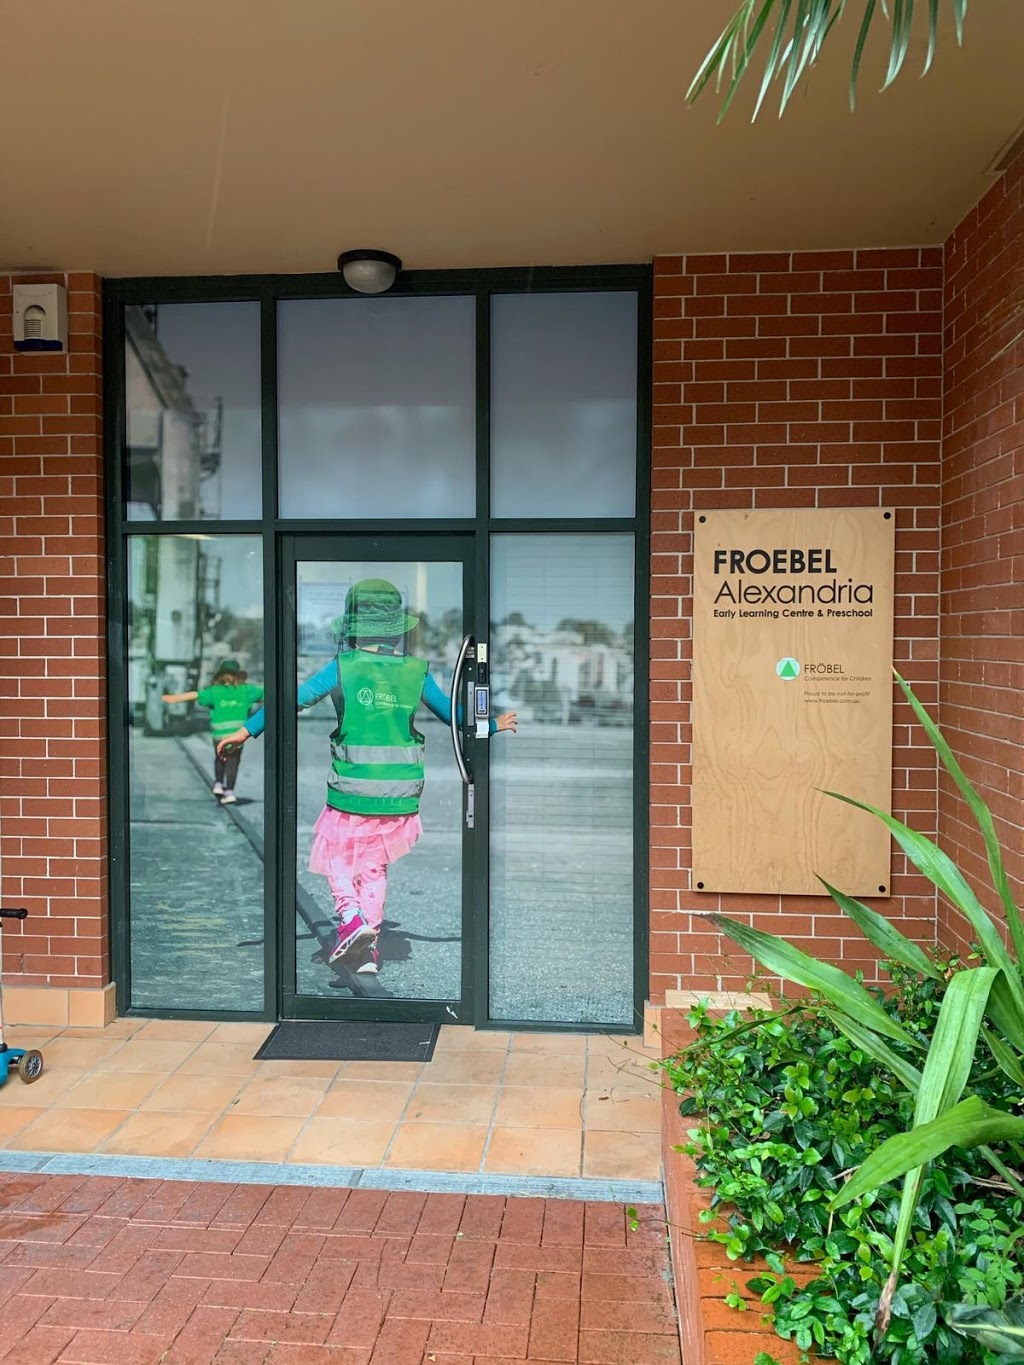 FROEBEL Alexandria Early Learning Centre and Preschool | Suite 7105, 177-219 Mitchell Road close to, Sydney Park Rd, Alexandria NSW 2015, Australia | Phone: (02) 9565 4500